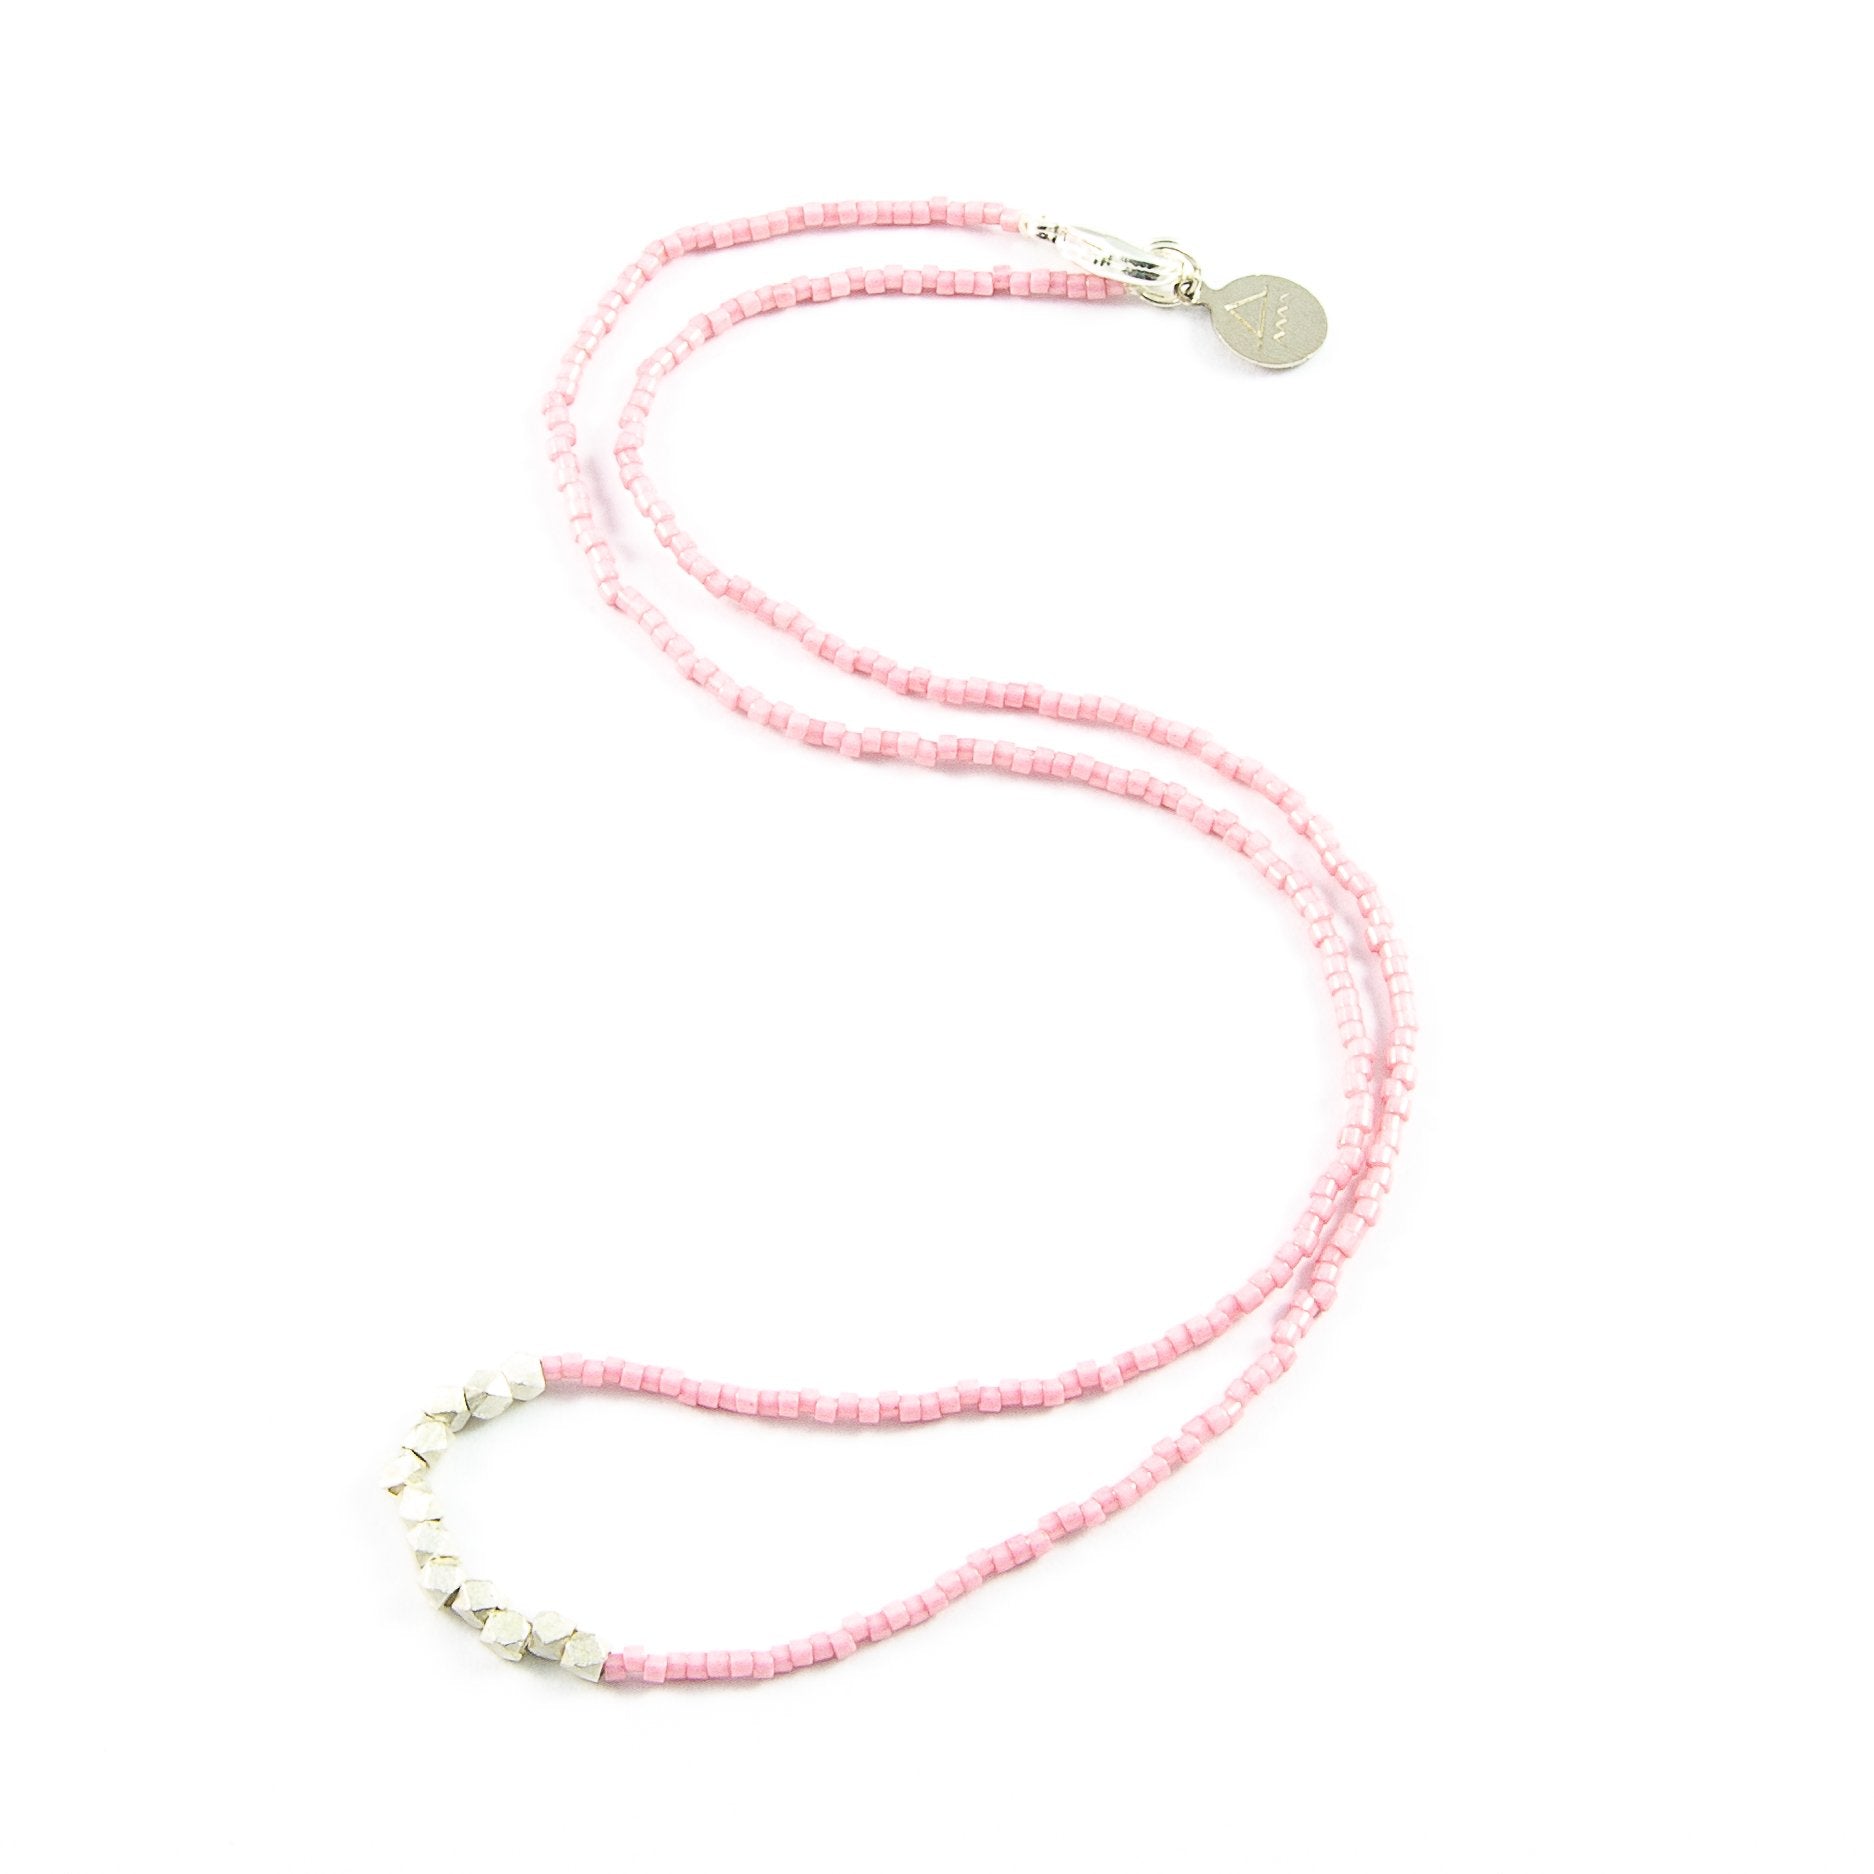 Blush Day to Night Necklace in Silver